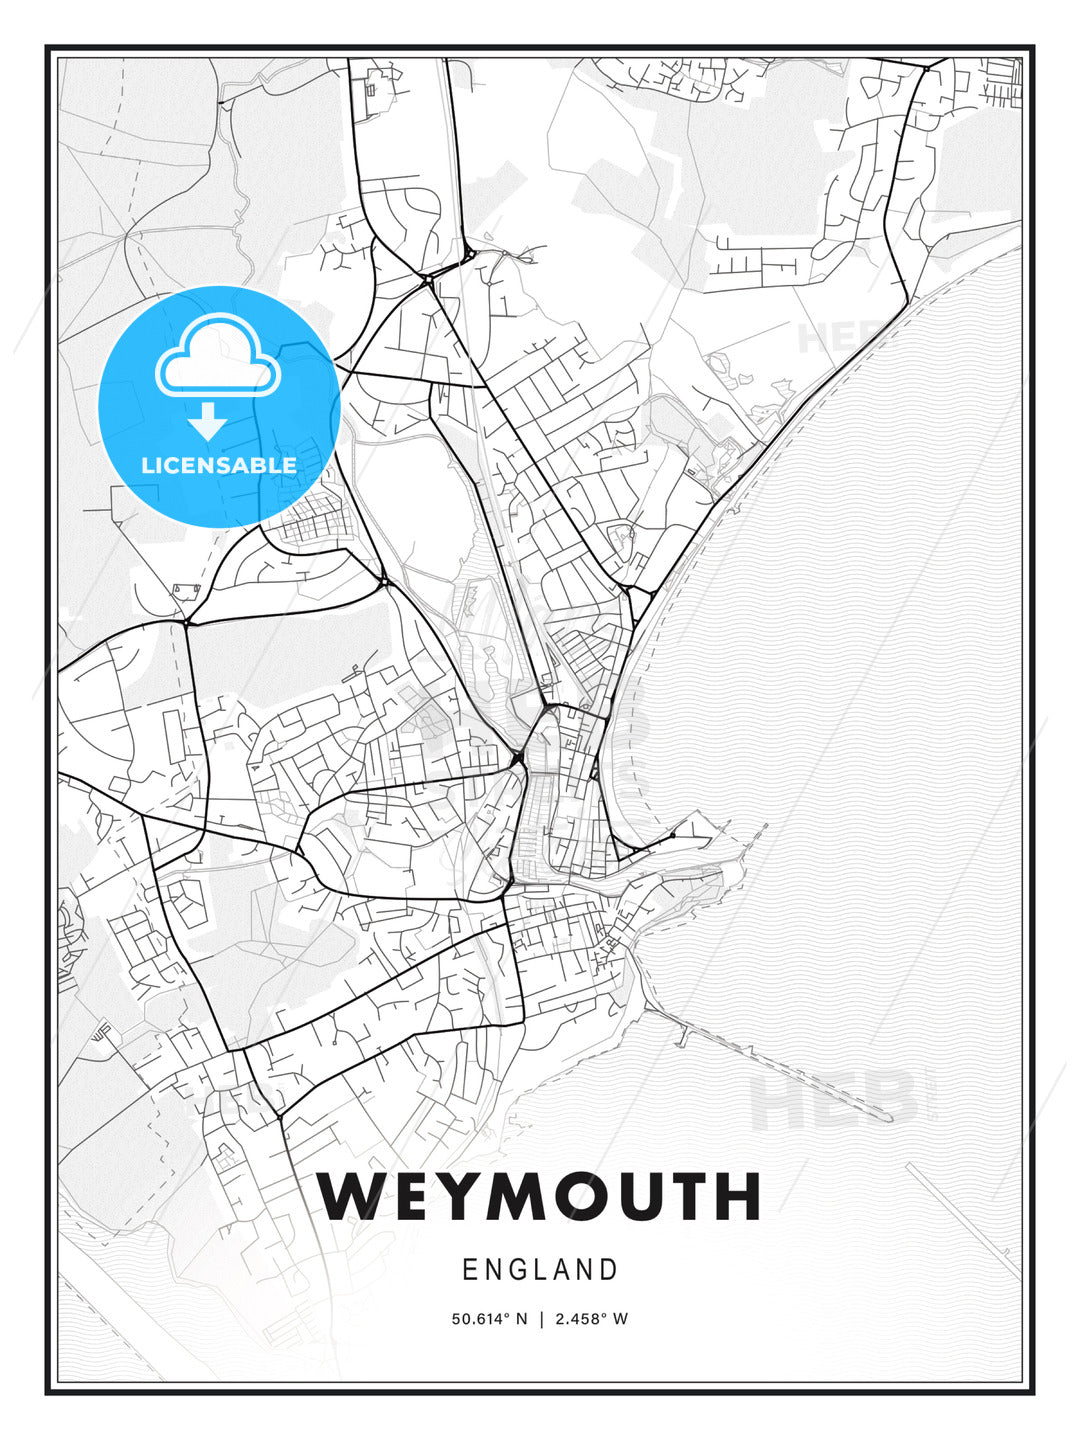 Weymouth, England, Modern Print Template in Various Formats - HEBSTREITS Sketches